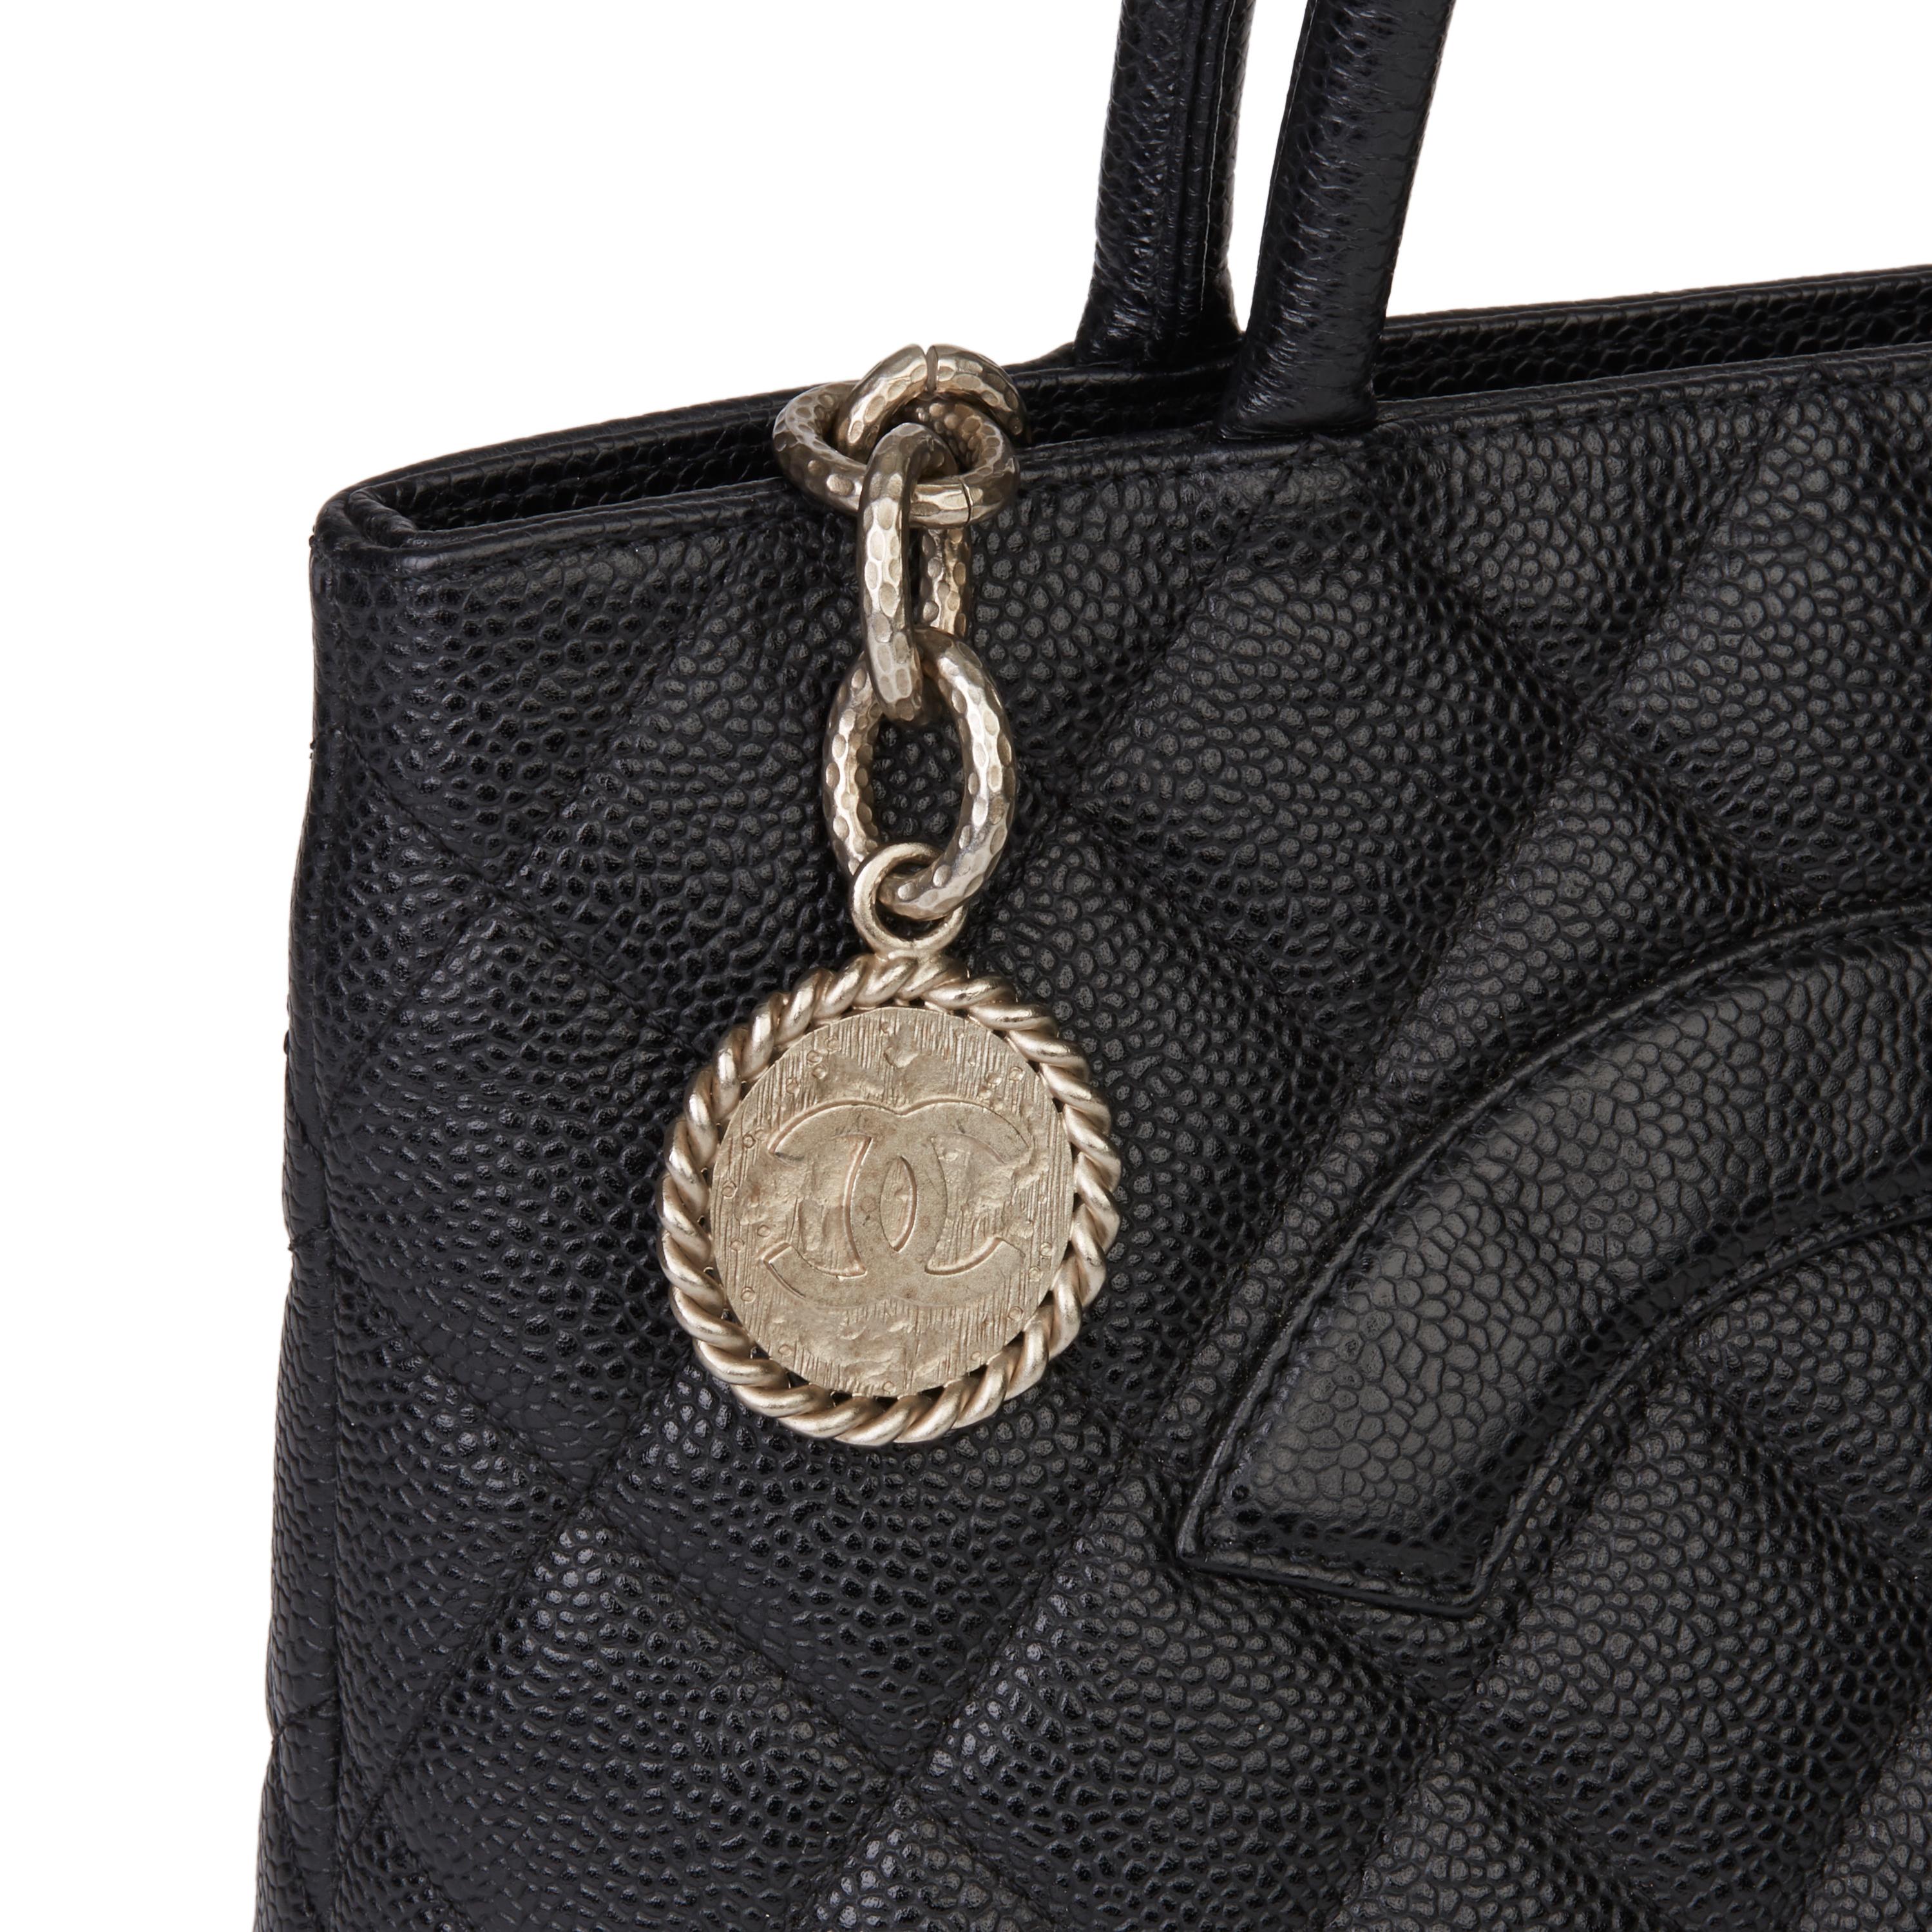 2000 Chanel Black Quilted Caviar Leather Vintage Medallion Tote 3